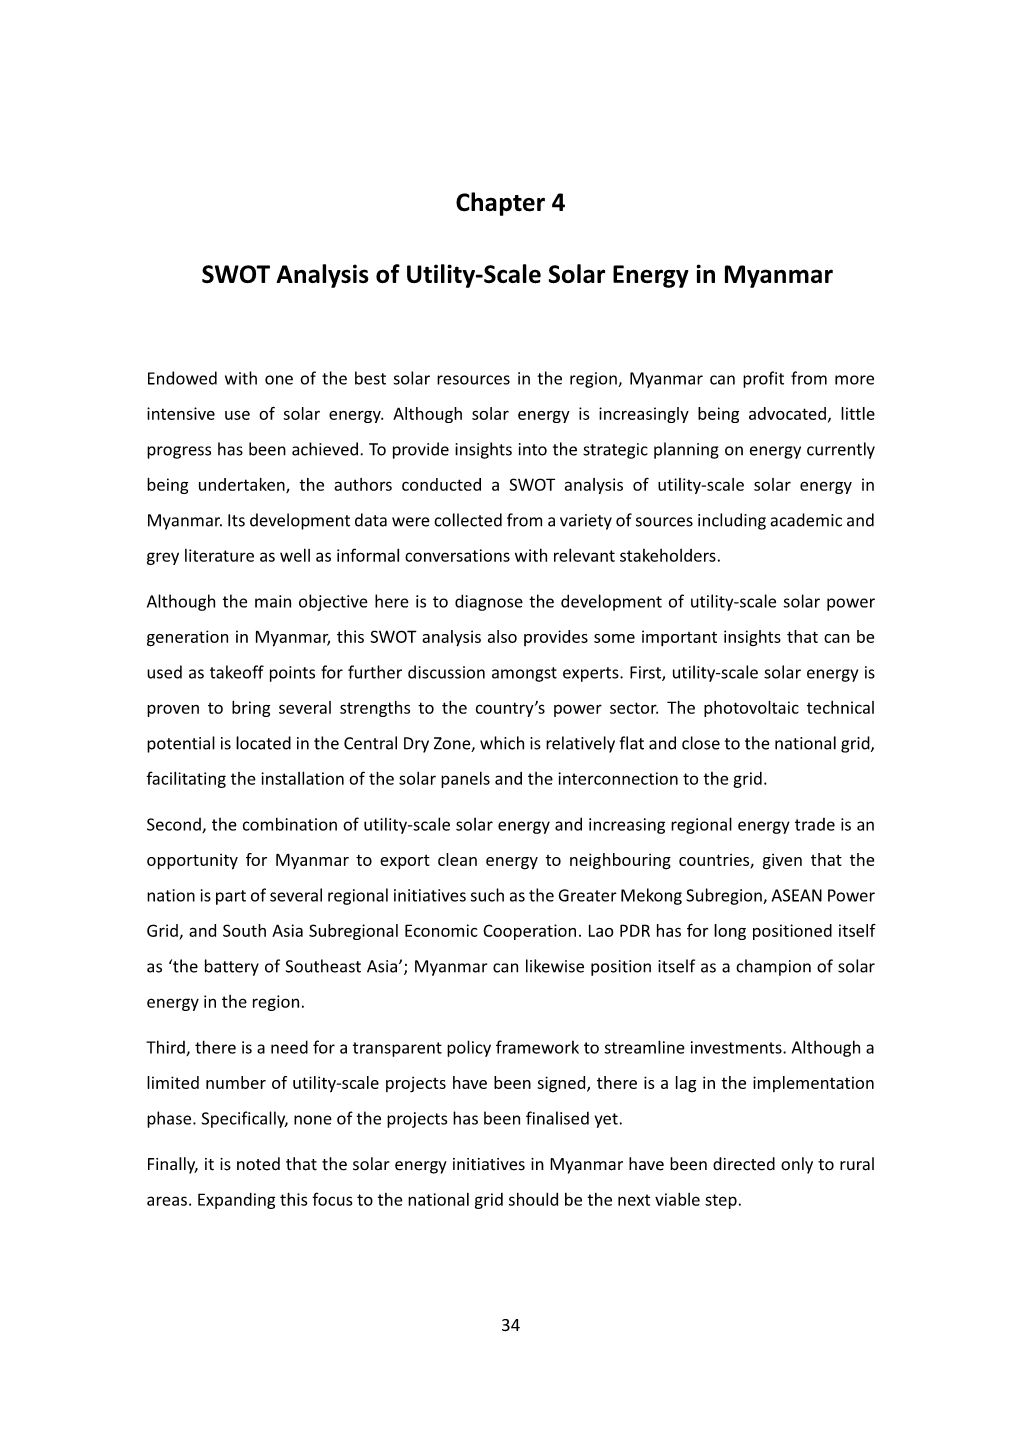 Chapter 4. SWOT Analysis of Utility-Scale Solar Energy in Myanmar